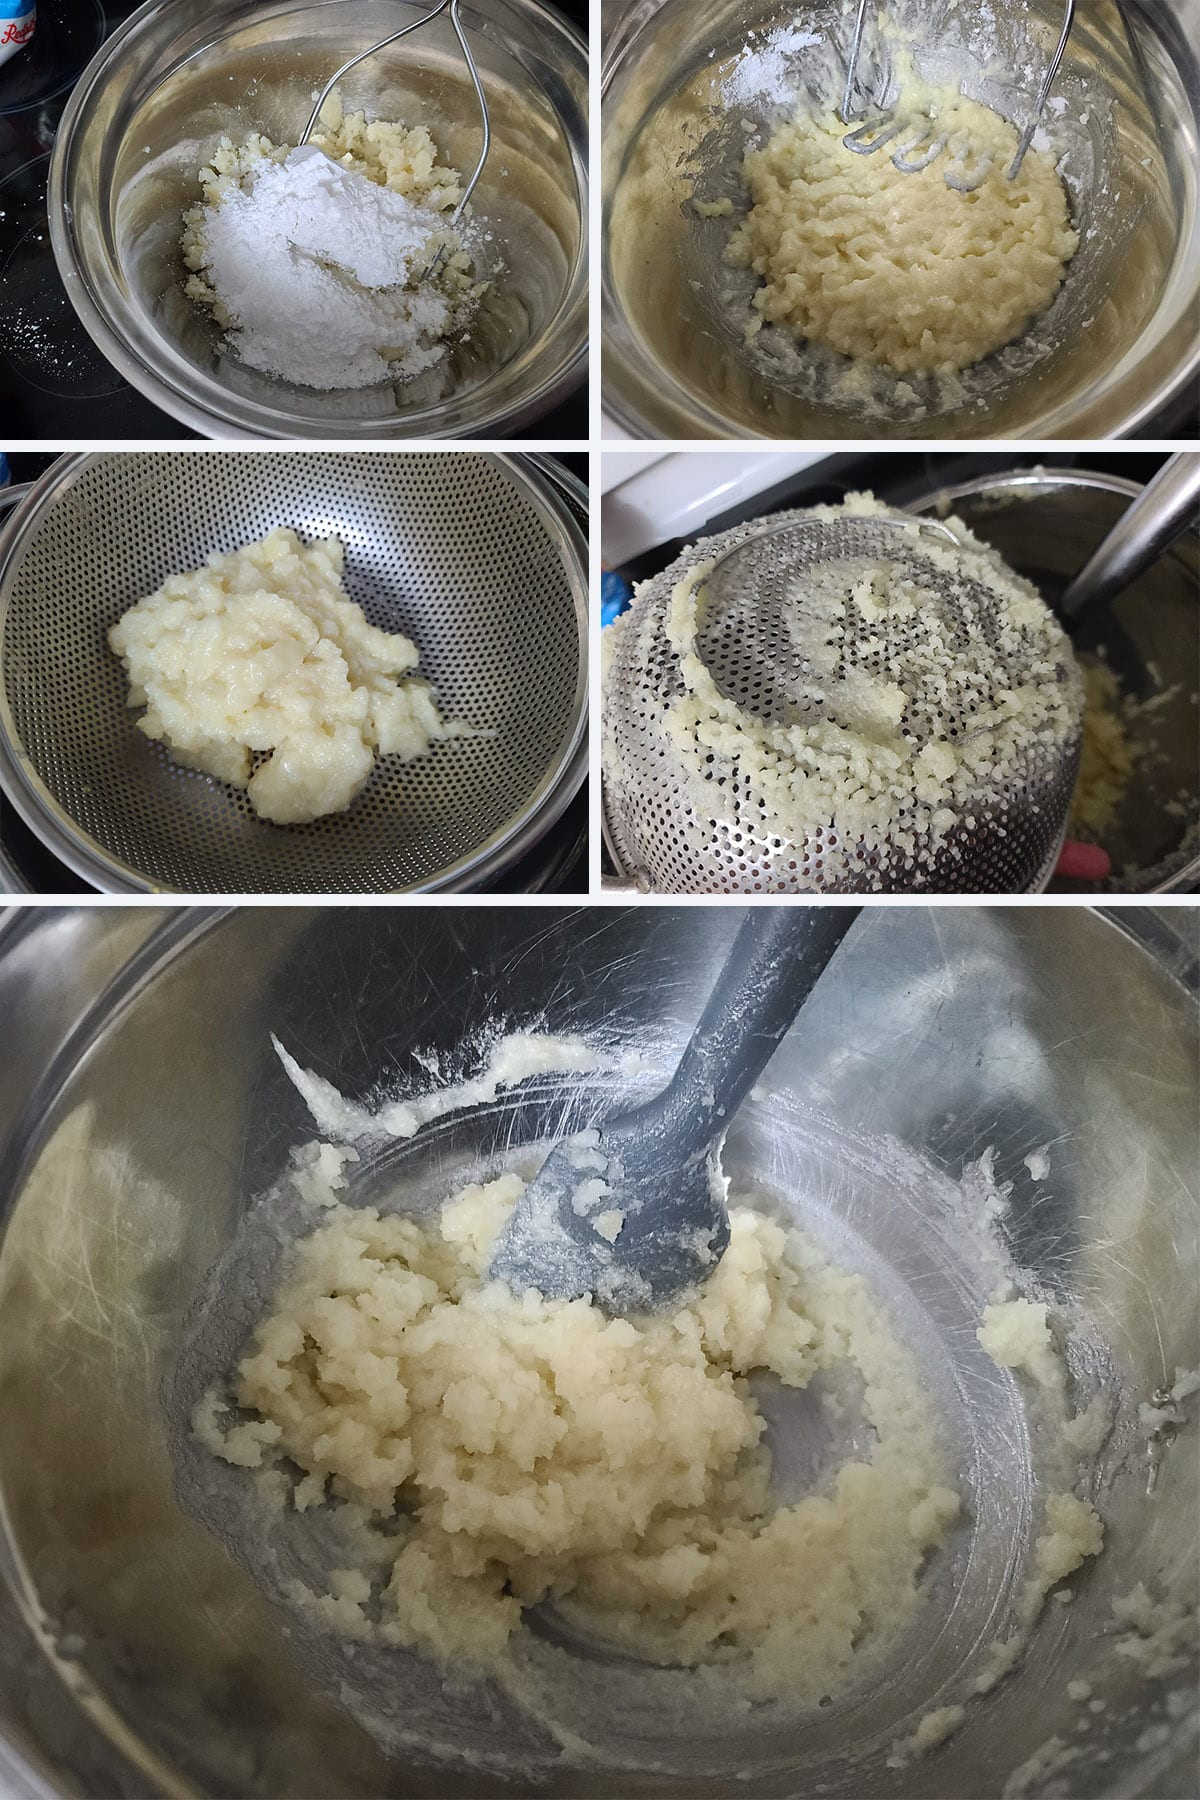 A 5 part image showing a bit of powdered sugar being added to the mashed potatoes, and the potatoes being pressed through a sieve.